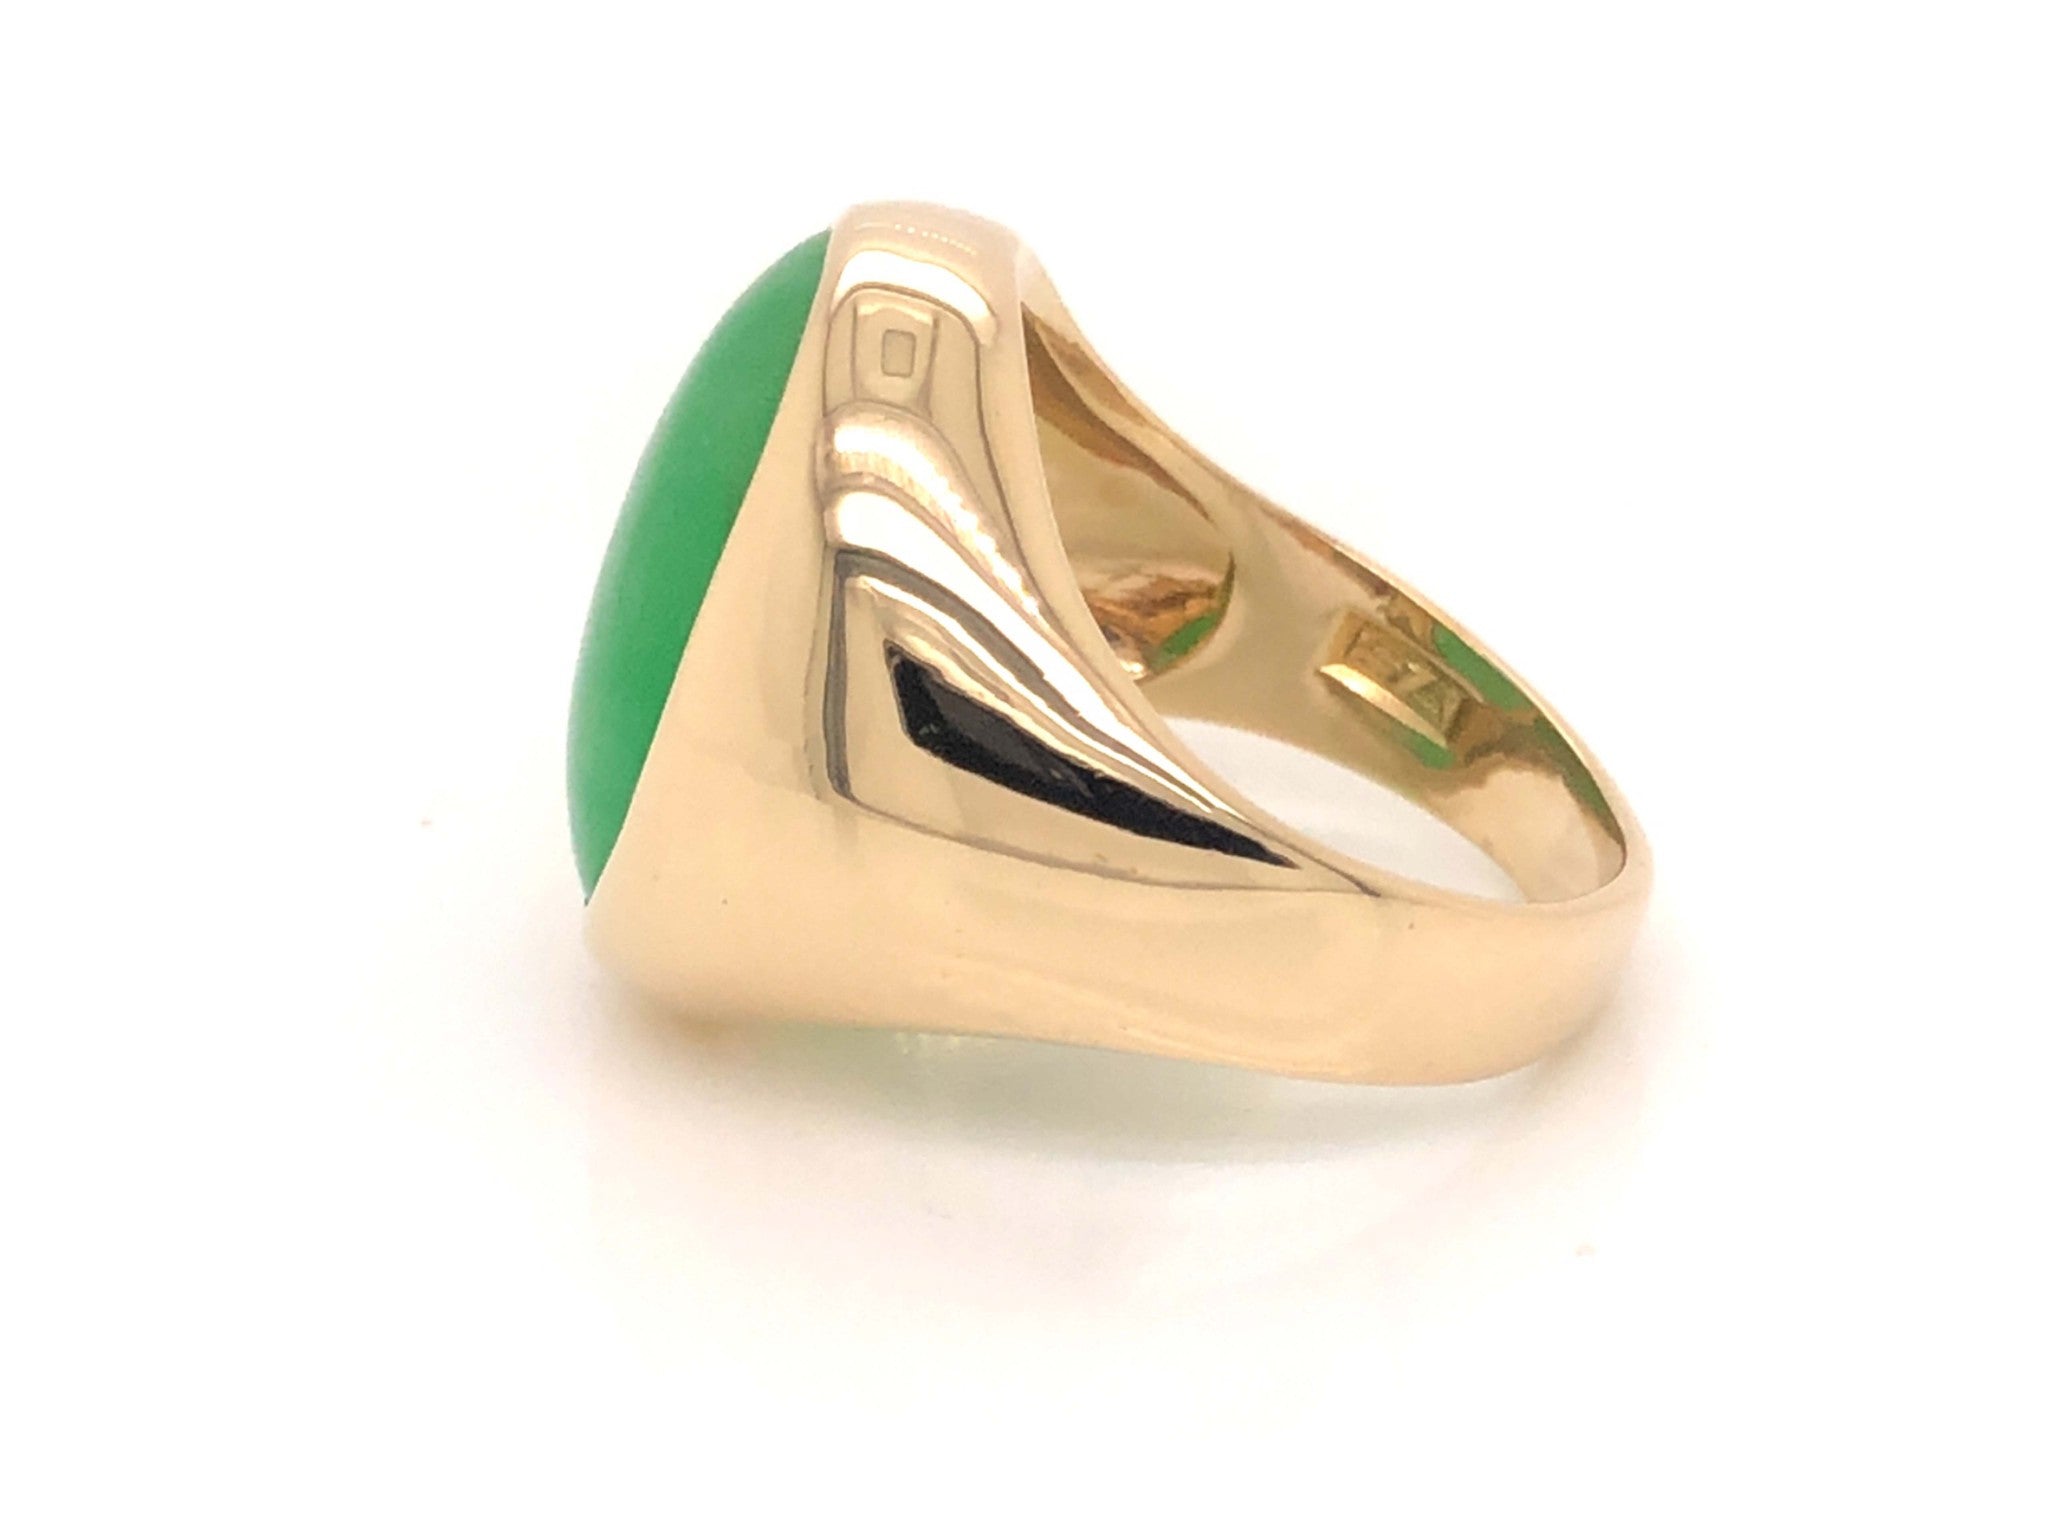 Vintage Men's Oval Cabochon Green Jade Ring - 10k Yellow Gold